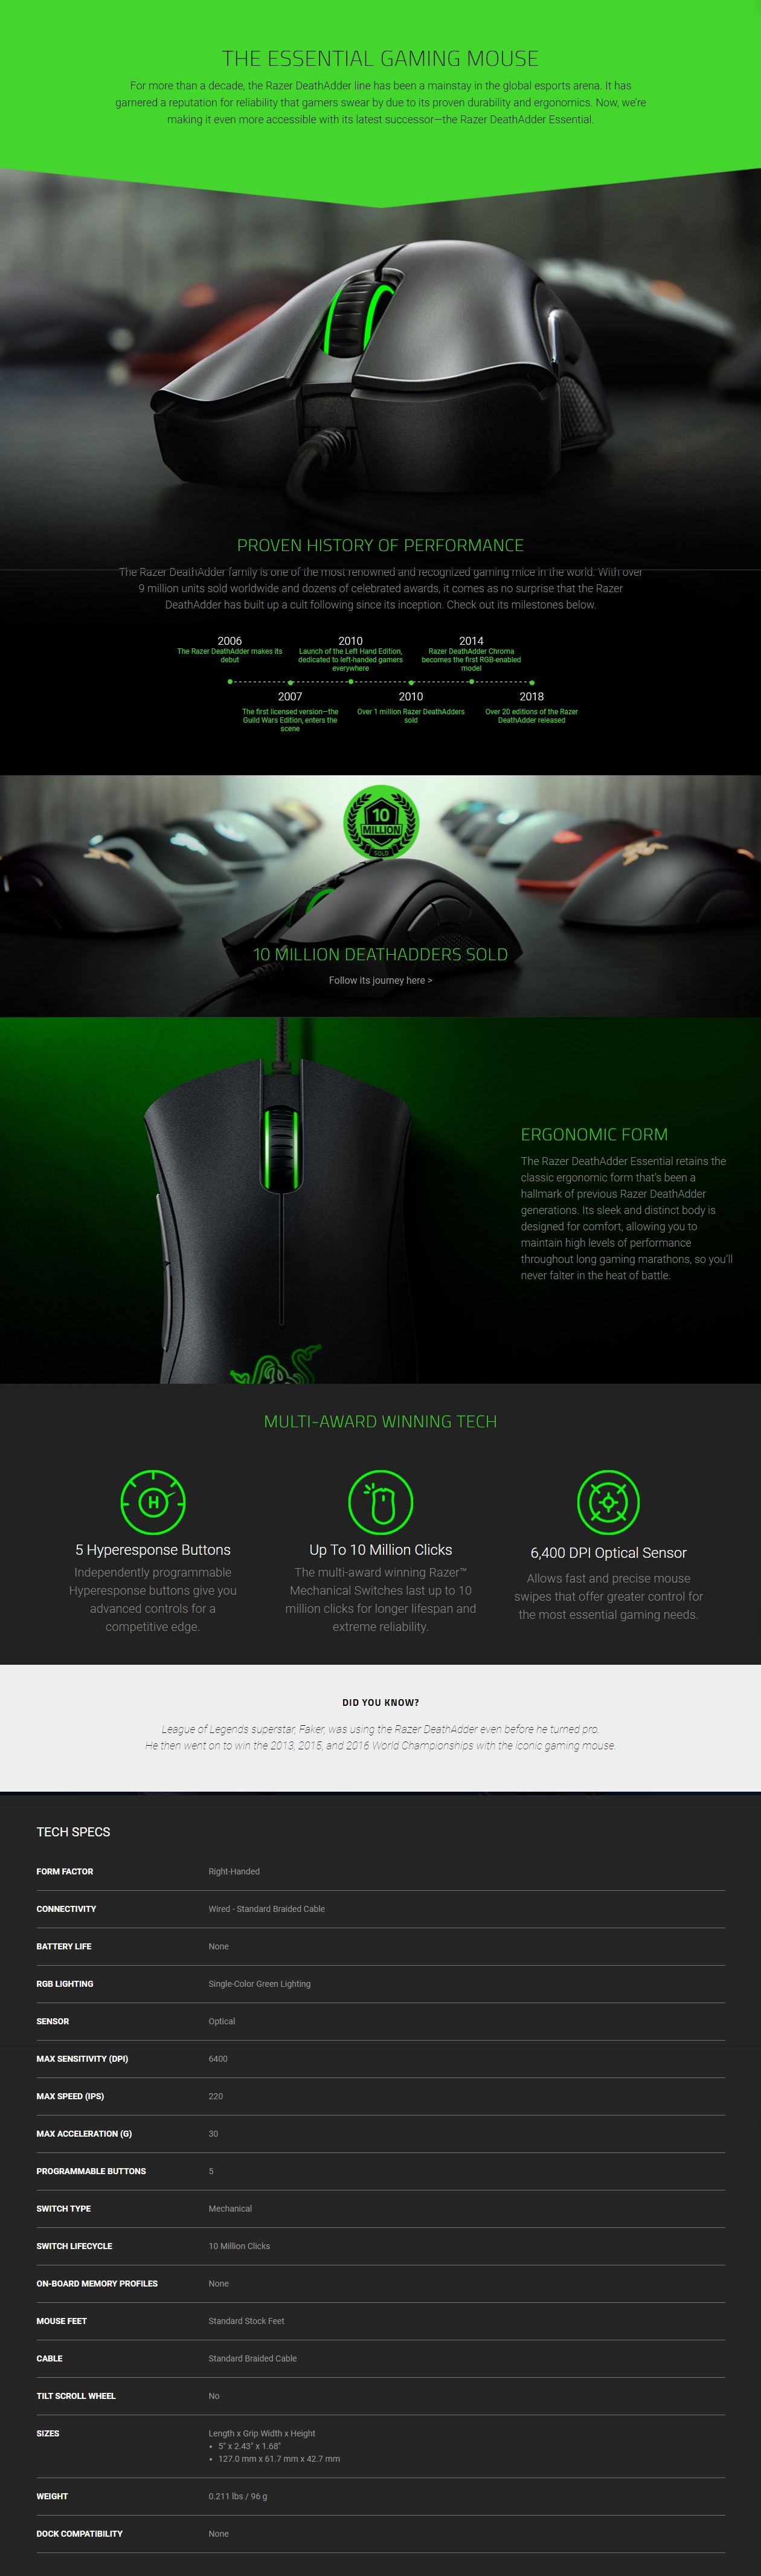 A large marketing image providing additional information about the product Razer DeathAdder Essential - Wired Ergonomic Gaming Mouse (Black) - Additional alt info not provided